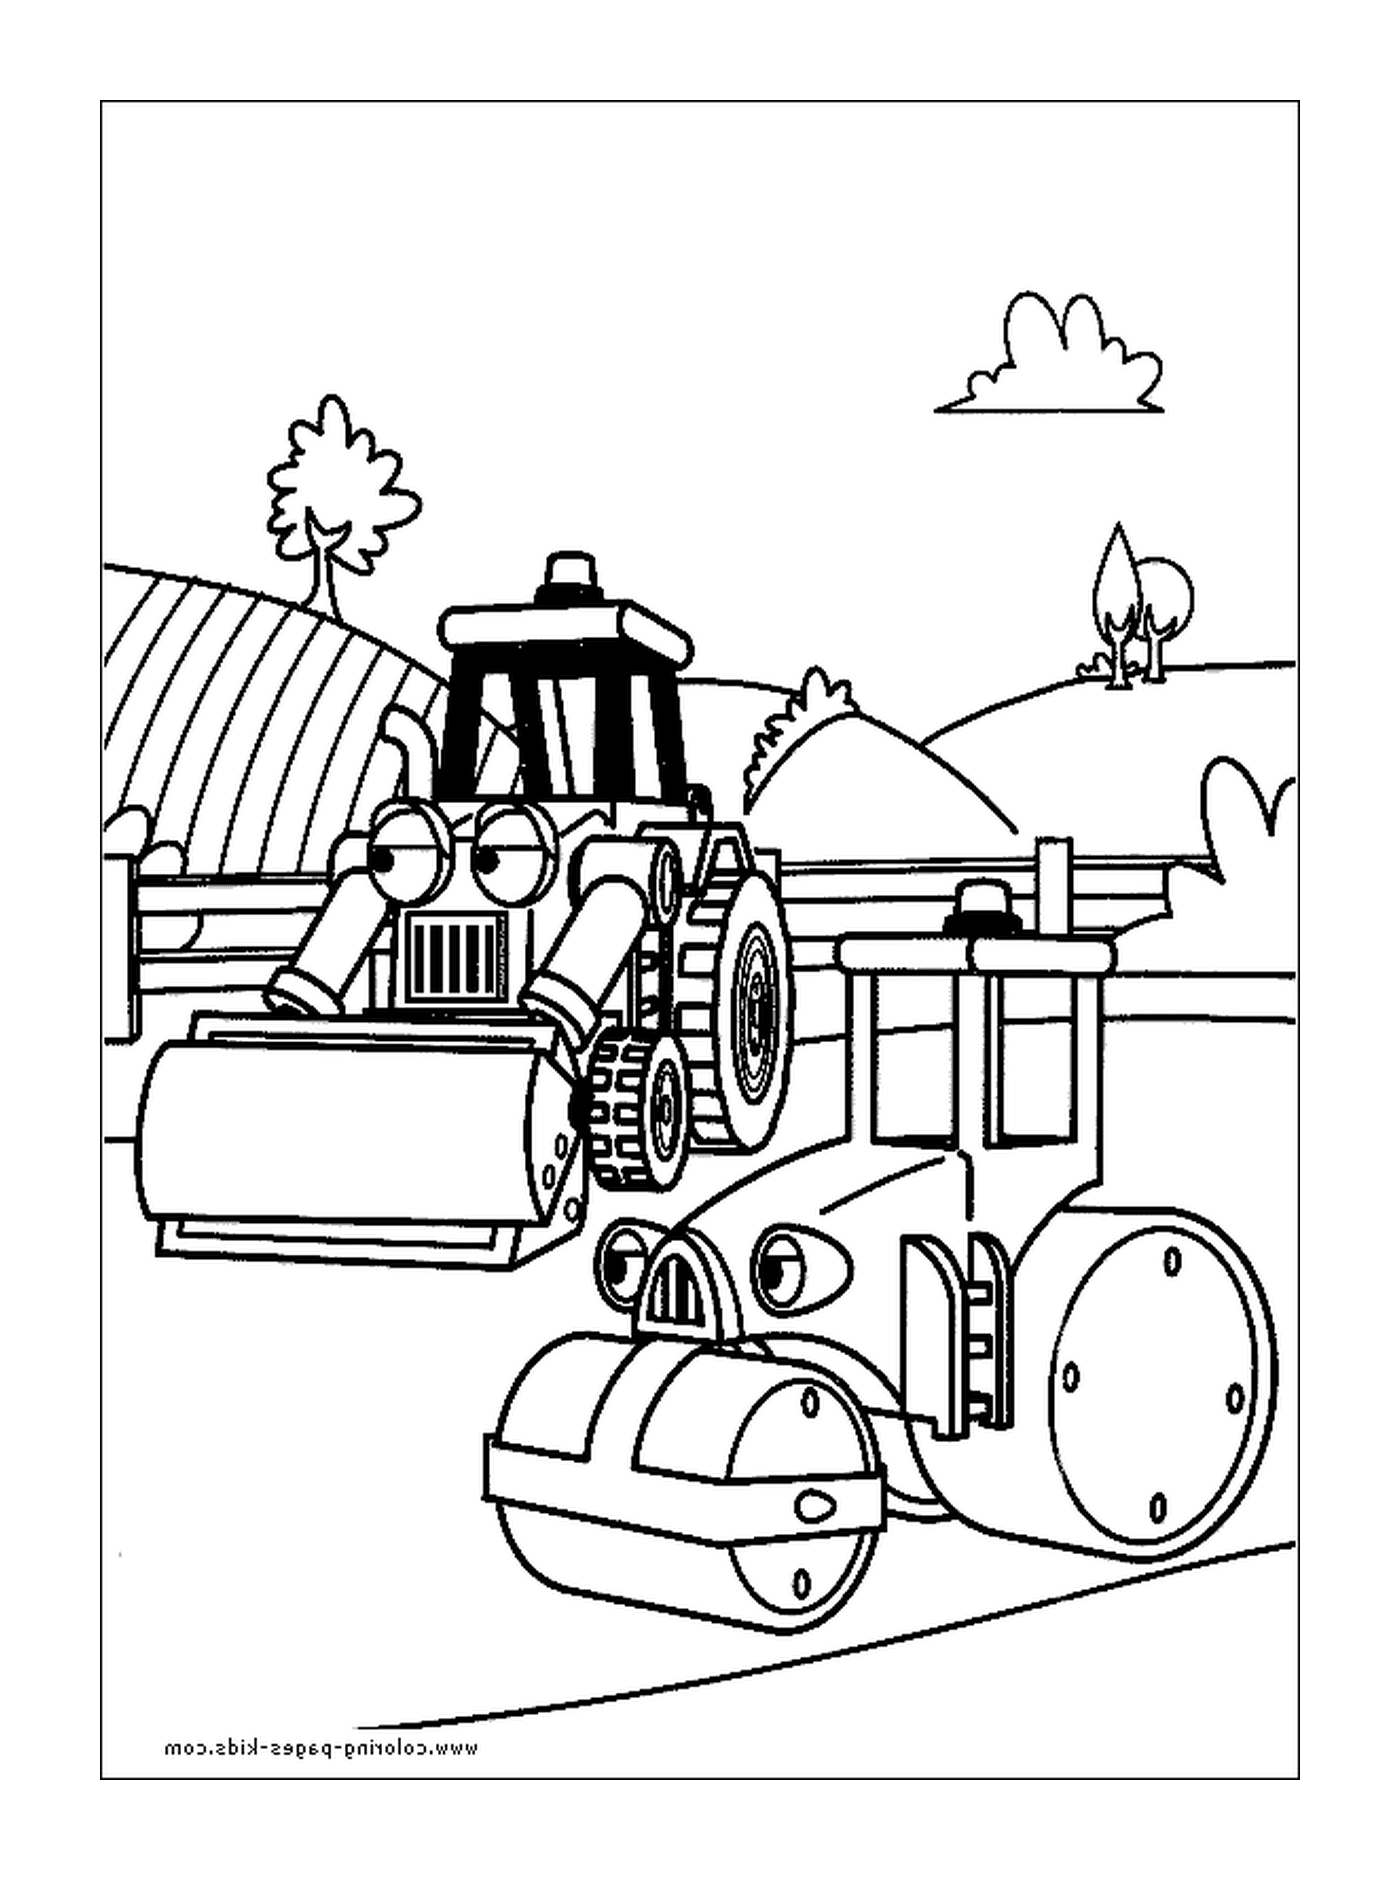  A crane and a construction tractor 